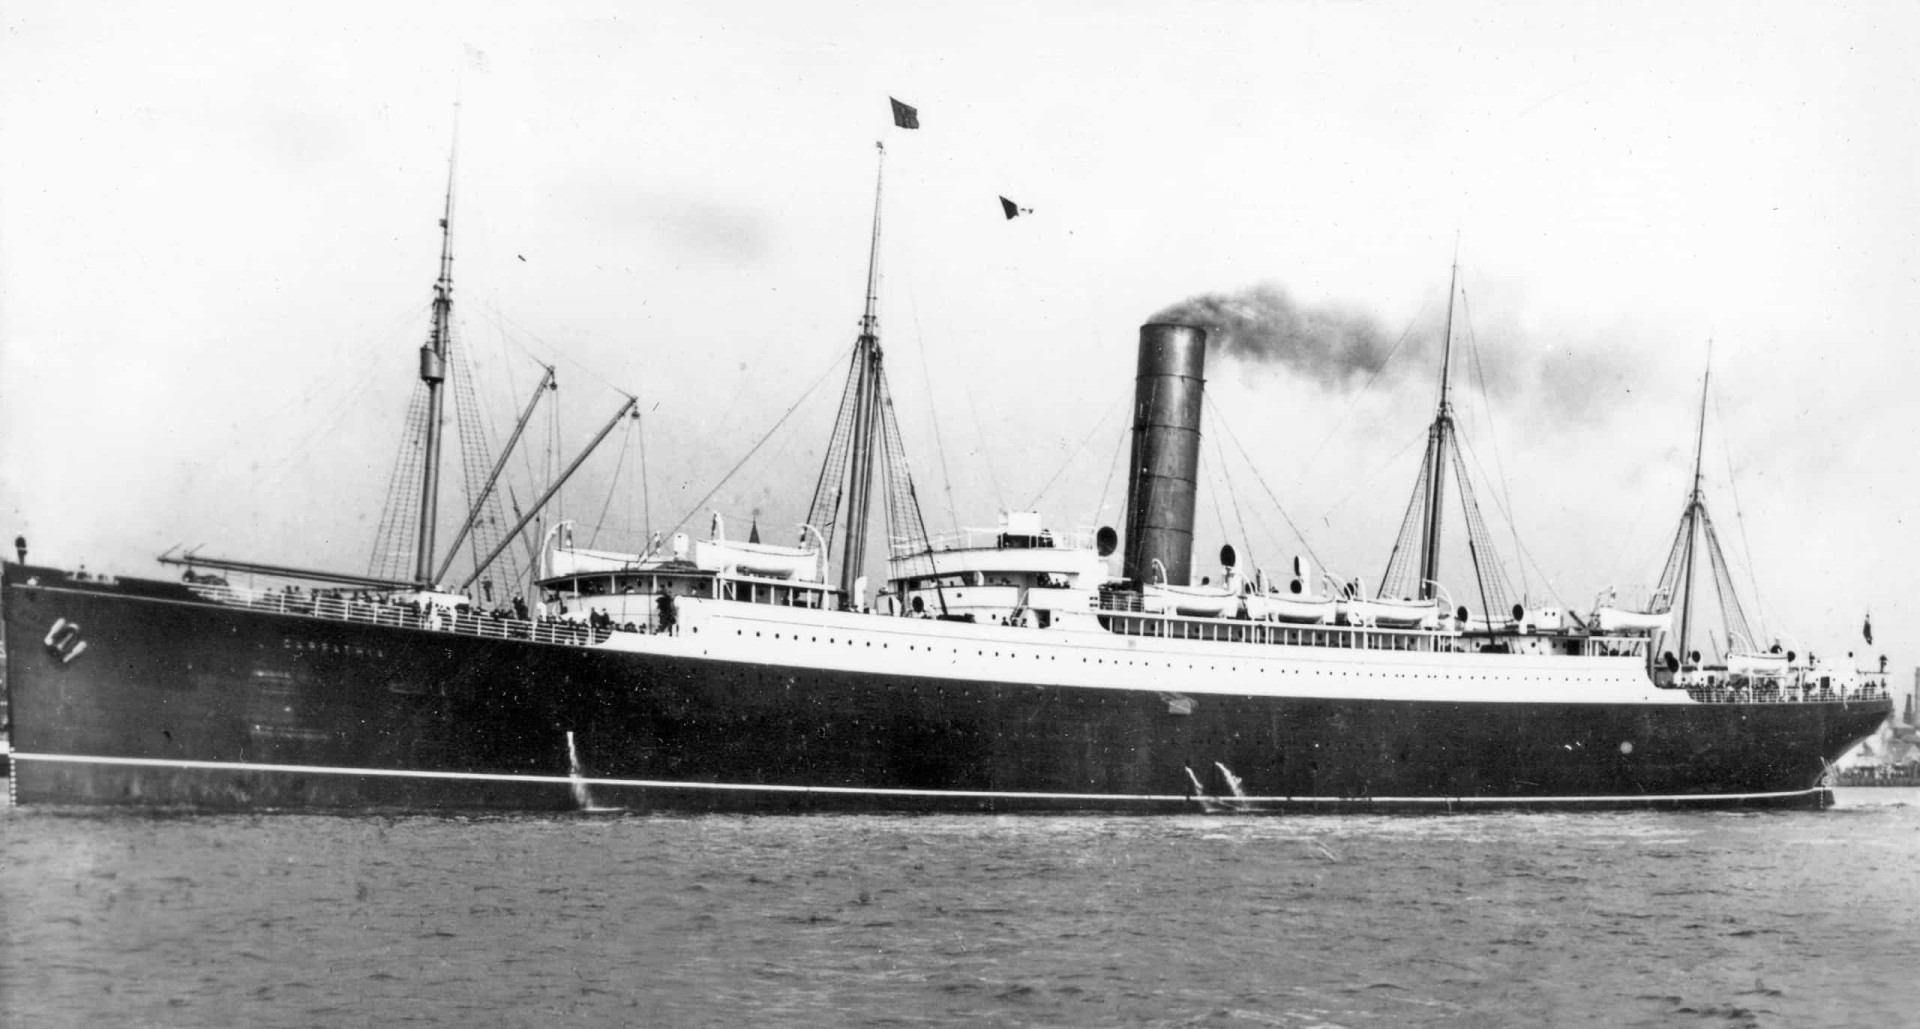 <p>Another Cunard transatlantic passenger steamship, RMS <em>Carpathia</em> found fame for different reasons. This is the vessel that sailed to the assistance of the stricken RMS <em>Titanic</em> in April 1912, with the crew rescuing 705 survivors from the sunken ship's lifeboats.</p>